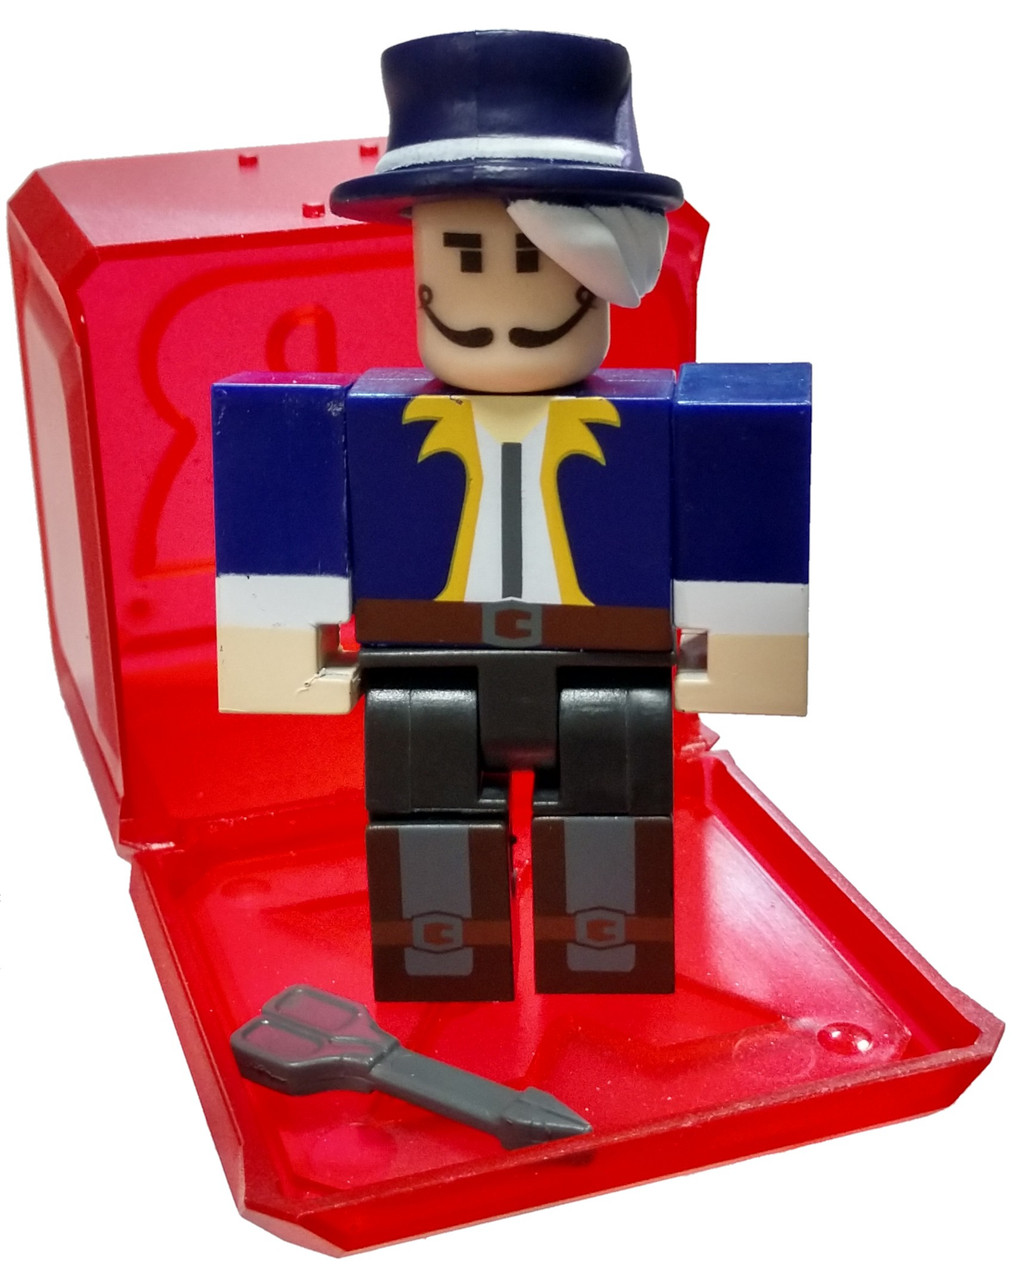 Roblox Celebrity Collection Series 5 Vesteria Barber S 3 Mini Figure With Red Cube And Online Code Loose Jazwares Toywiz - roblox assassin electro saw code